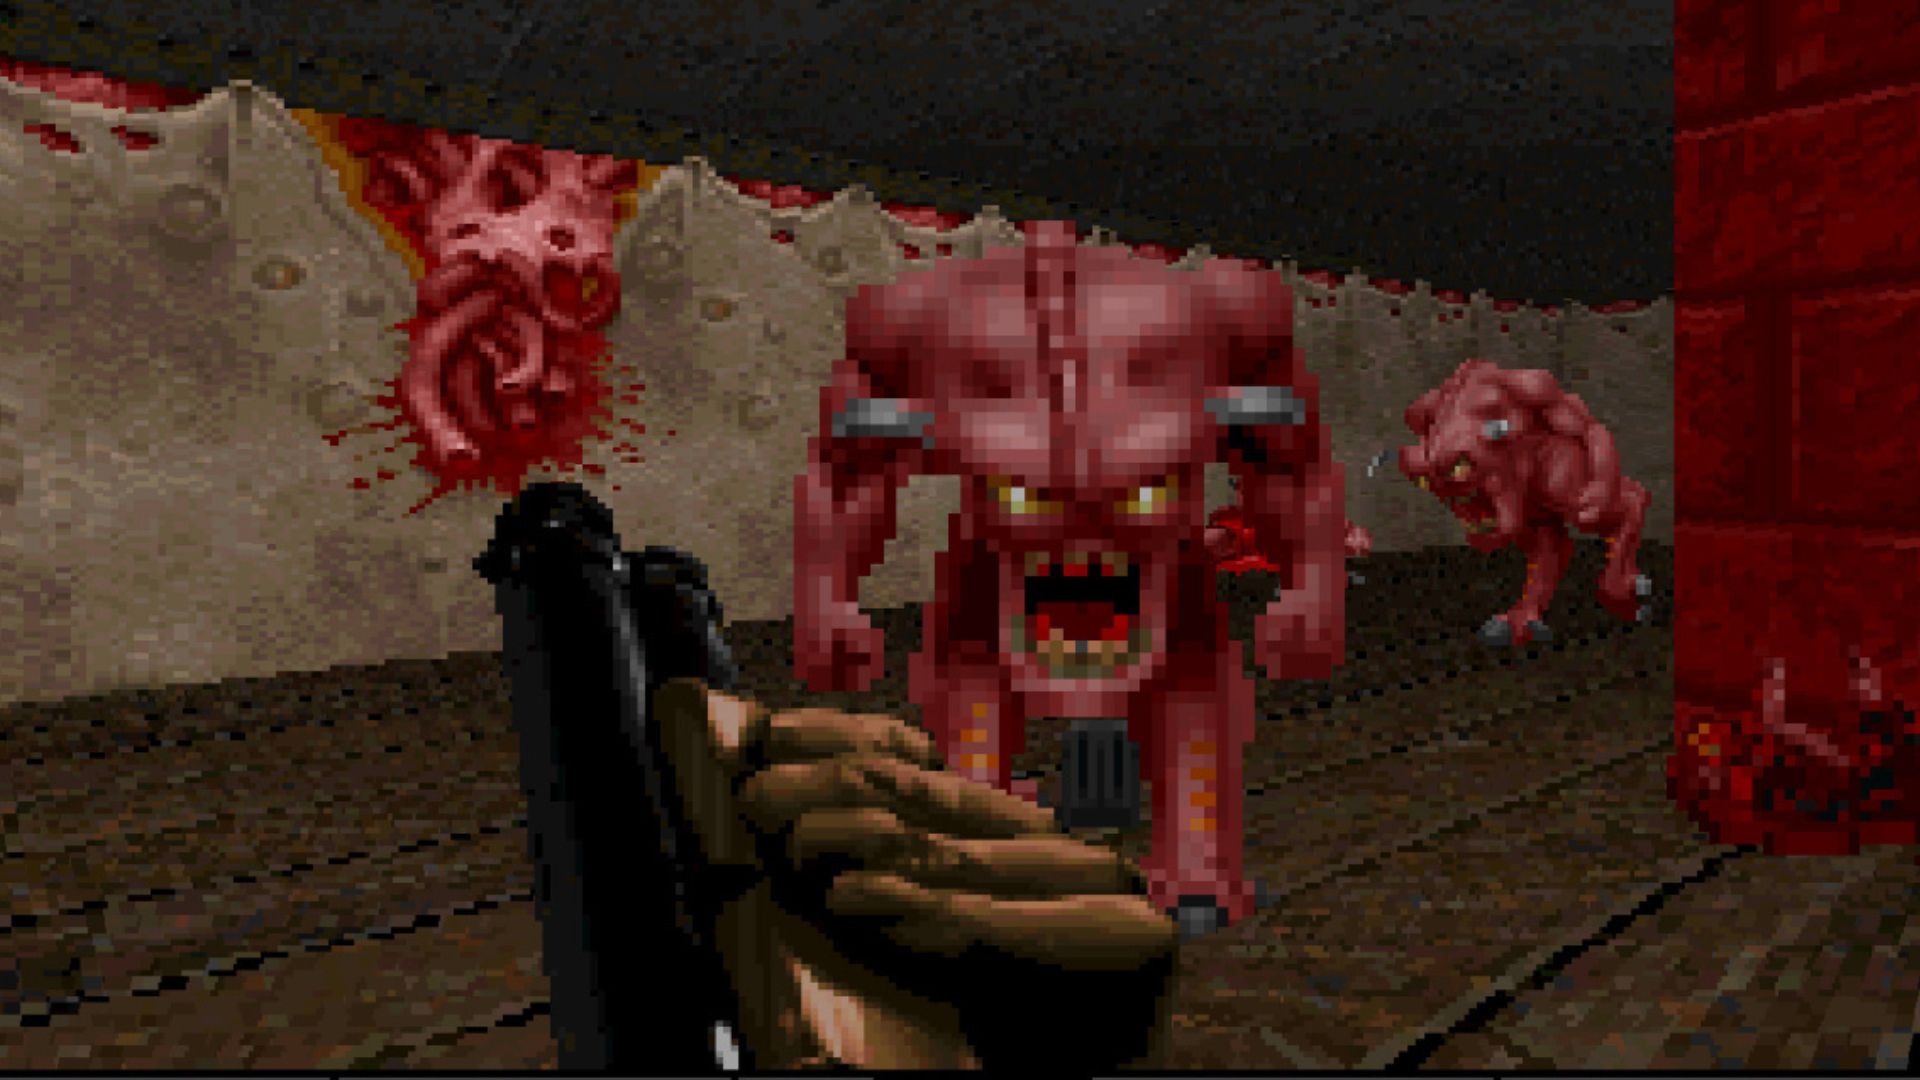 Best monster games: Doom. Image shows a red, pixely demon in the first Doom game.